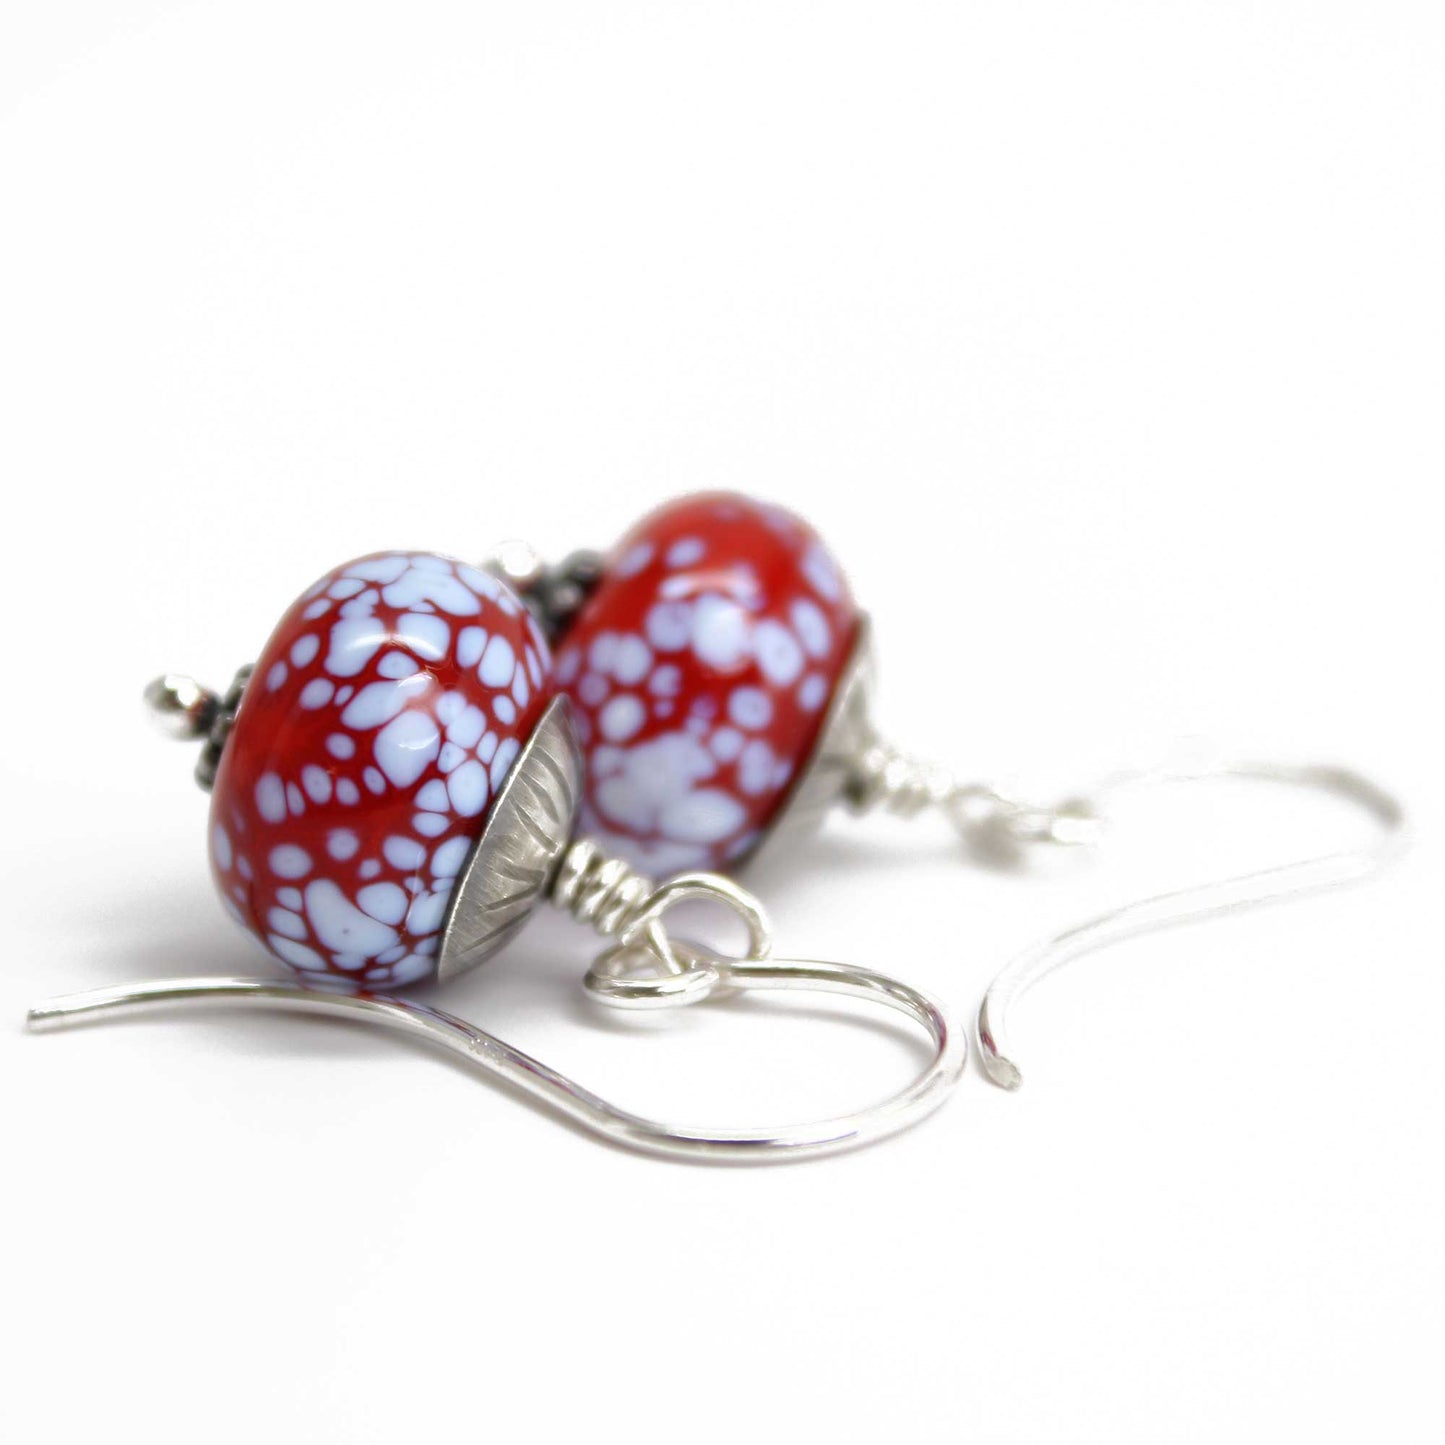 Red and White Lampwork Bead Earrings